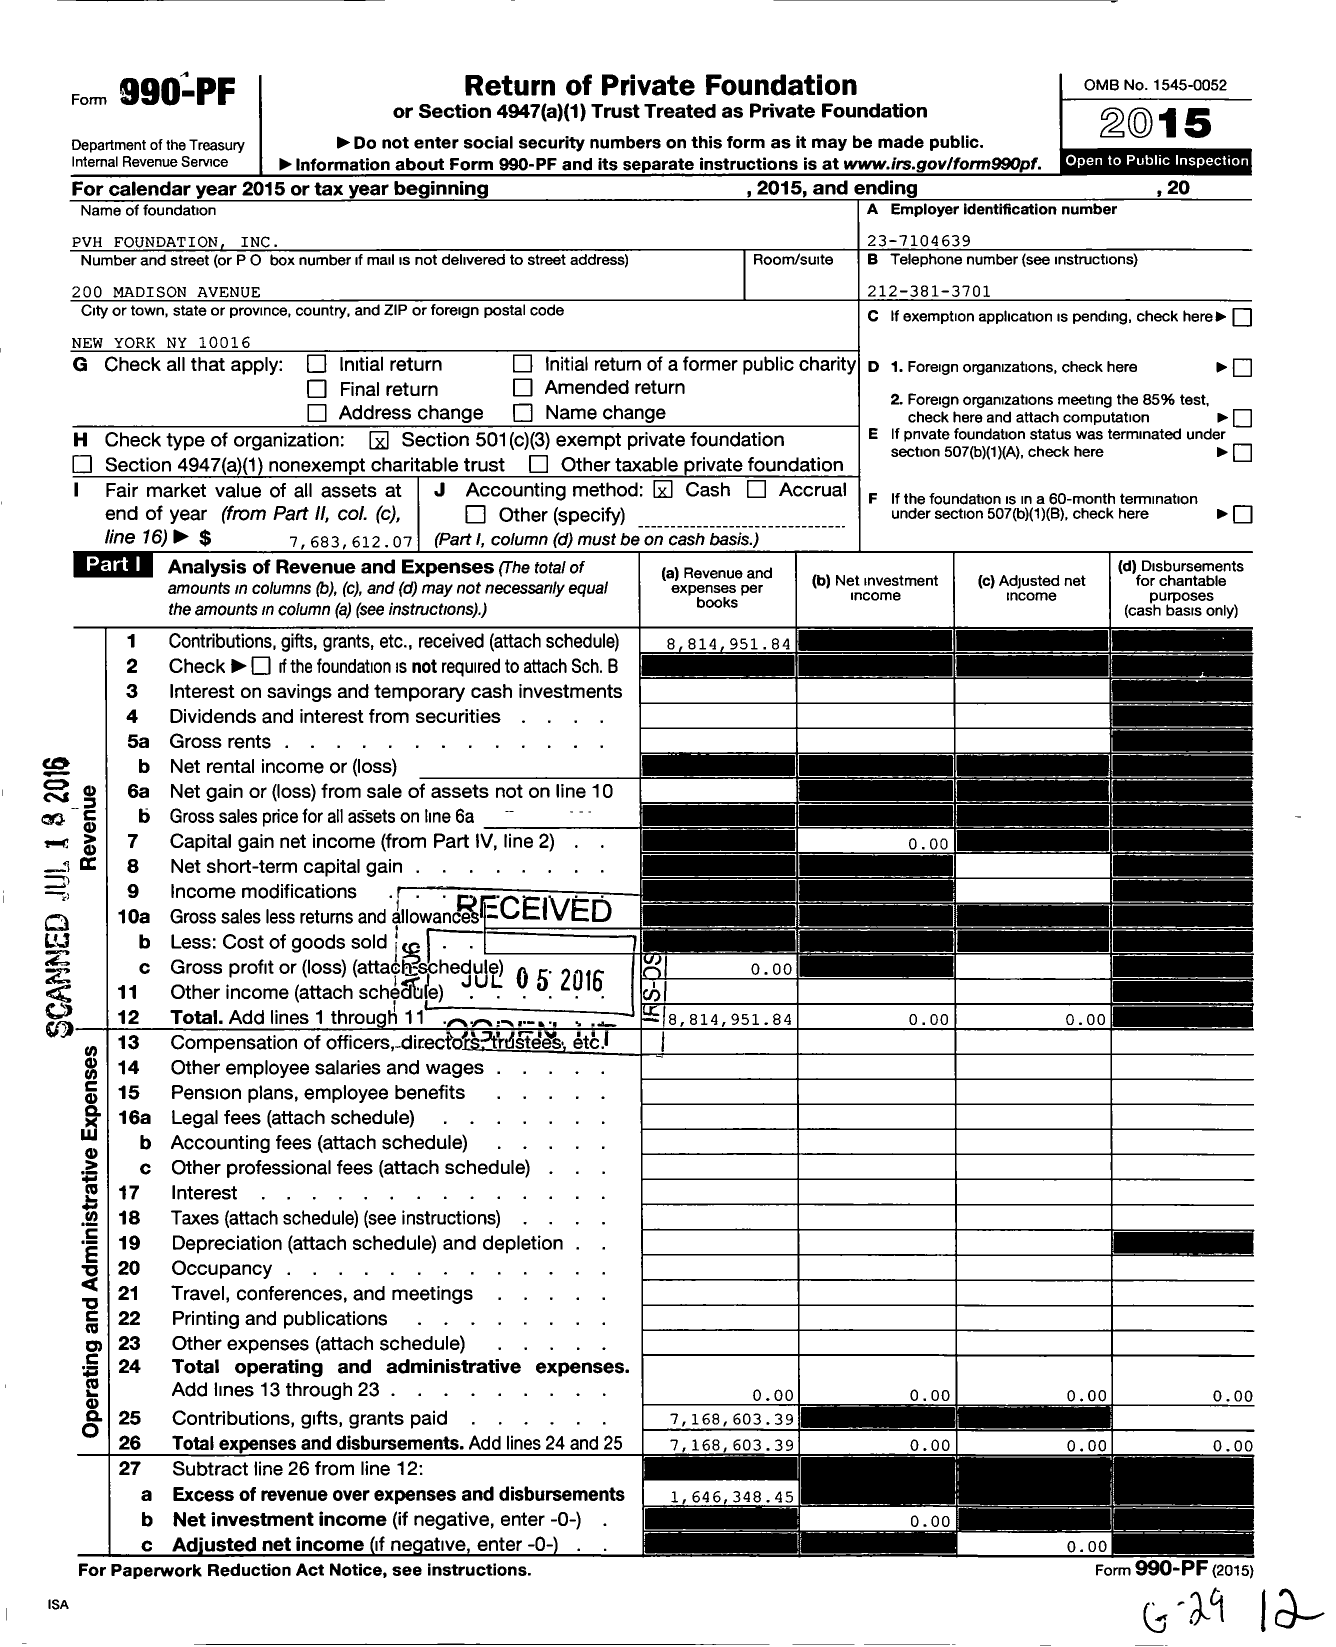 Image of first page of 2015 Form 990PF for PVH Foundation